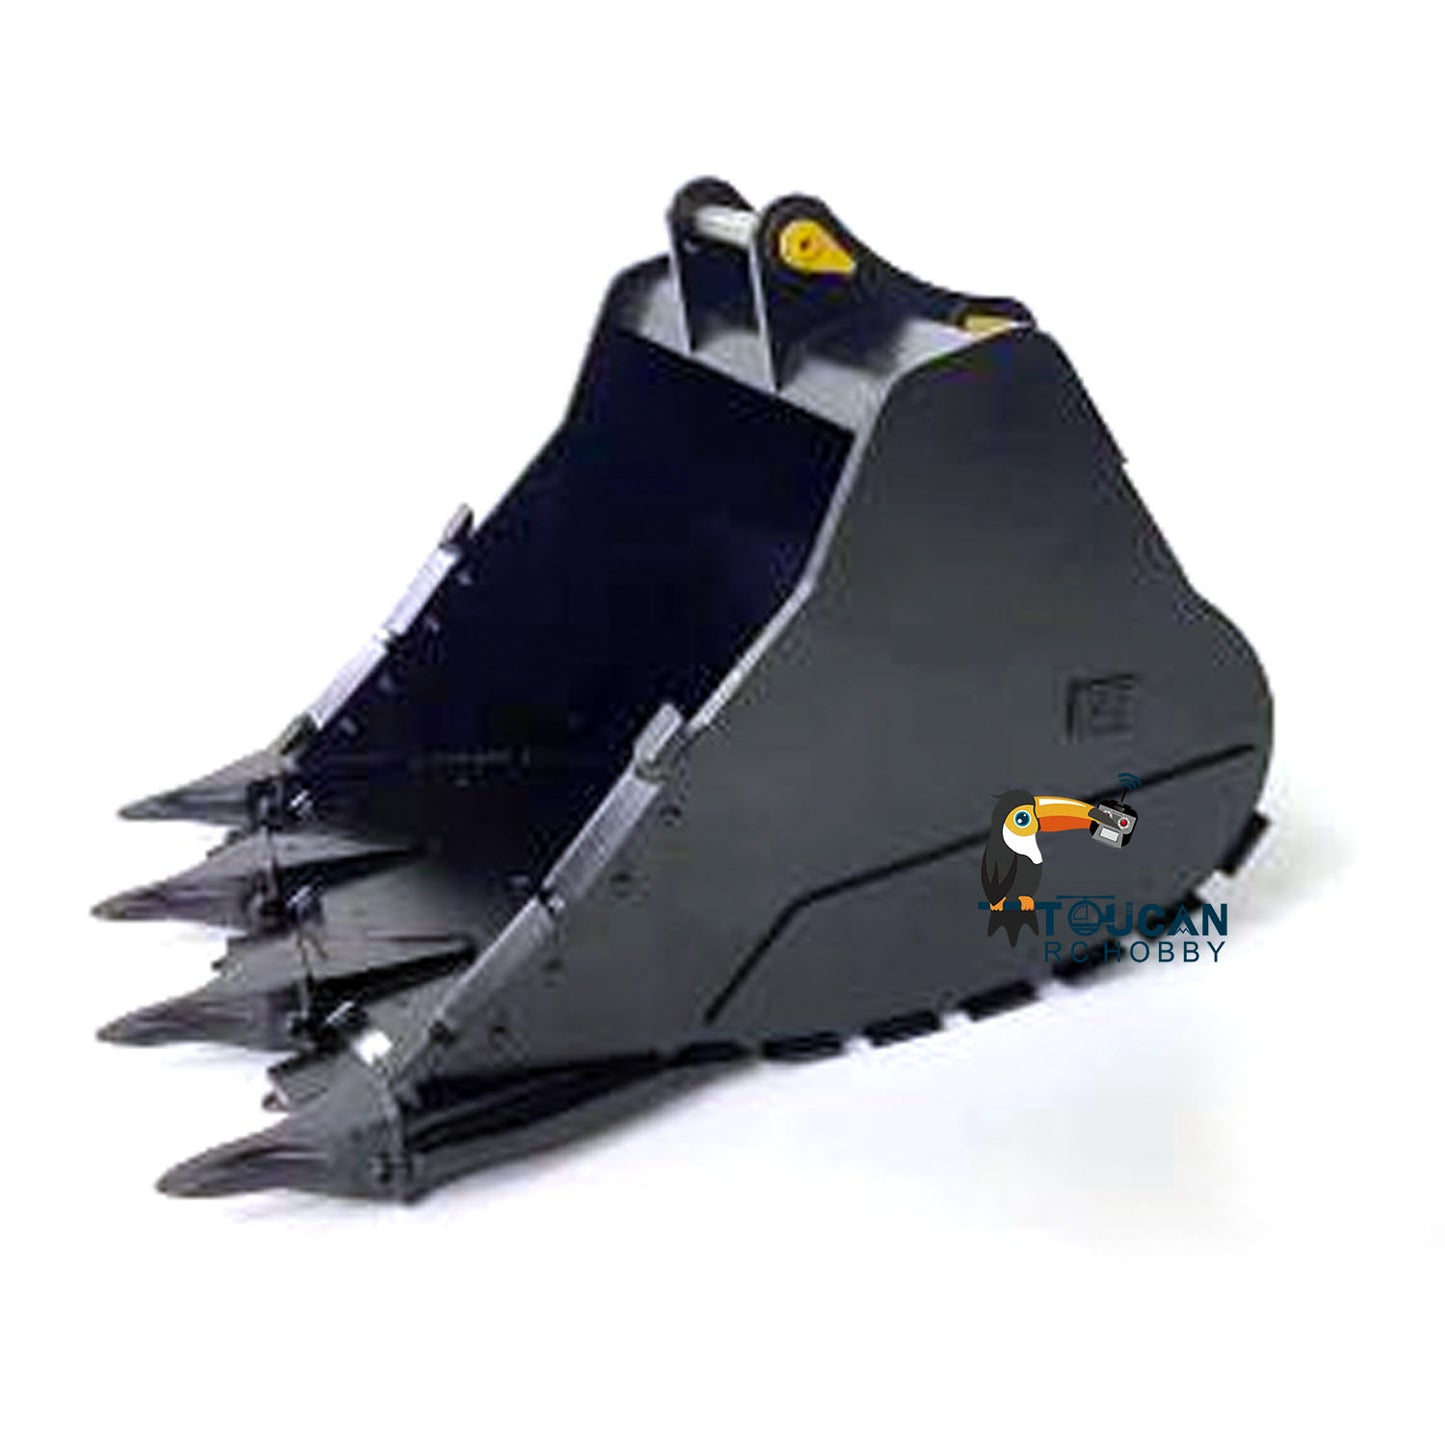 Metal Shovel Model Parts Vehicle Mining Bucket Claw Ripper Clamp for BMG 1/14 374F UHD Hydraulic RC Excavator Accessories